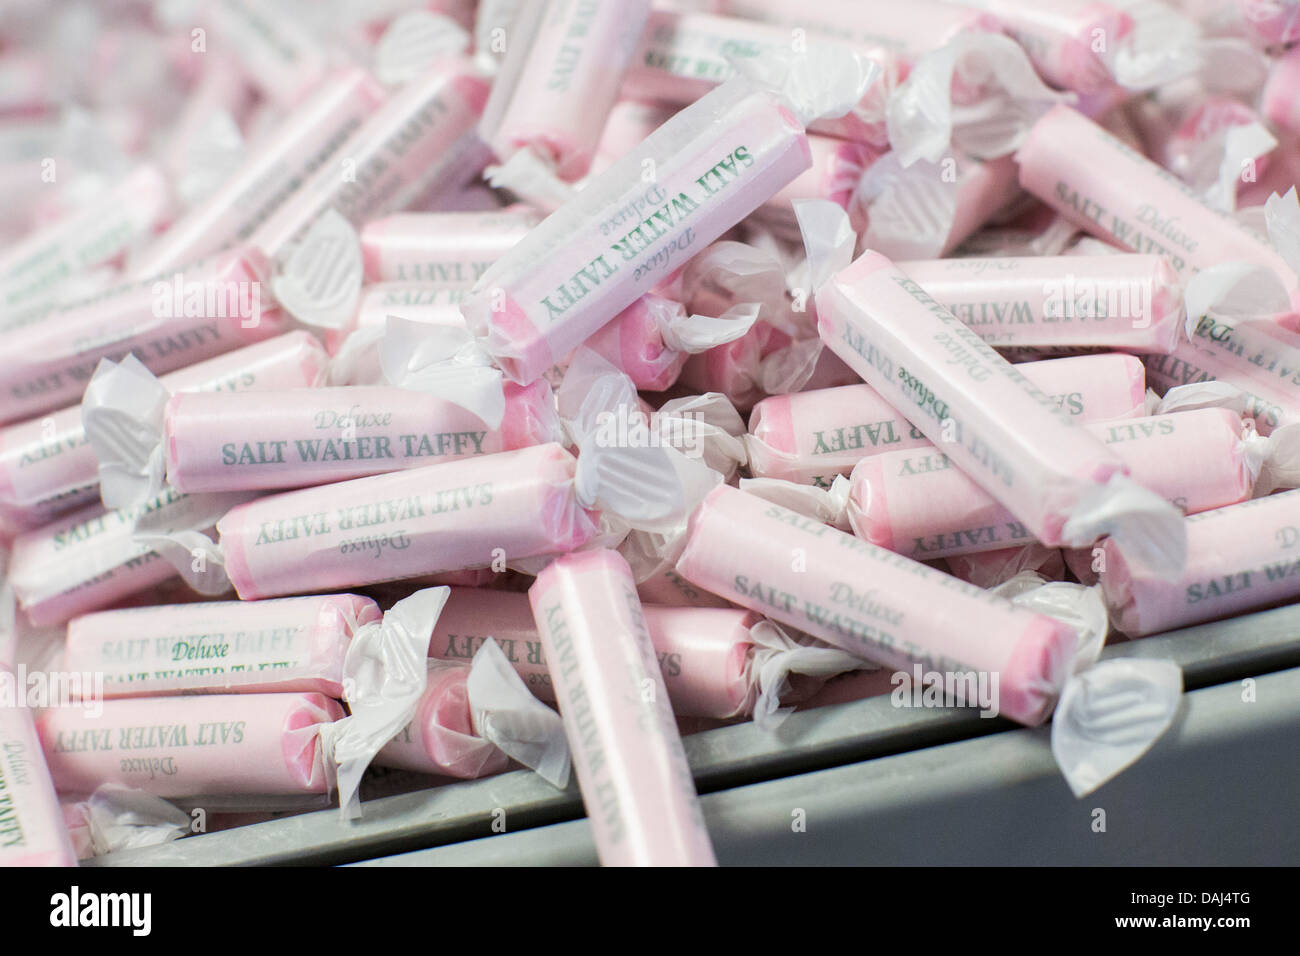 Salt water taffy production at the Dolle's Salt Water Taffy factory in Ocean City, Maryland.  Stock Photo